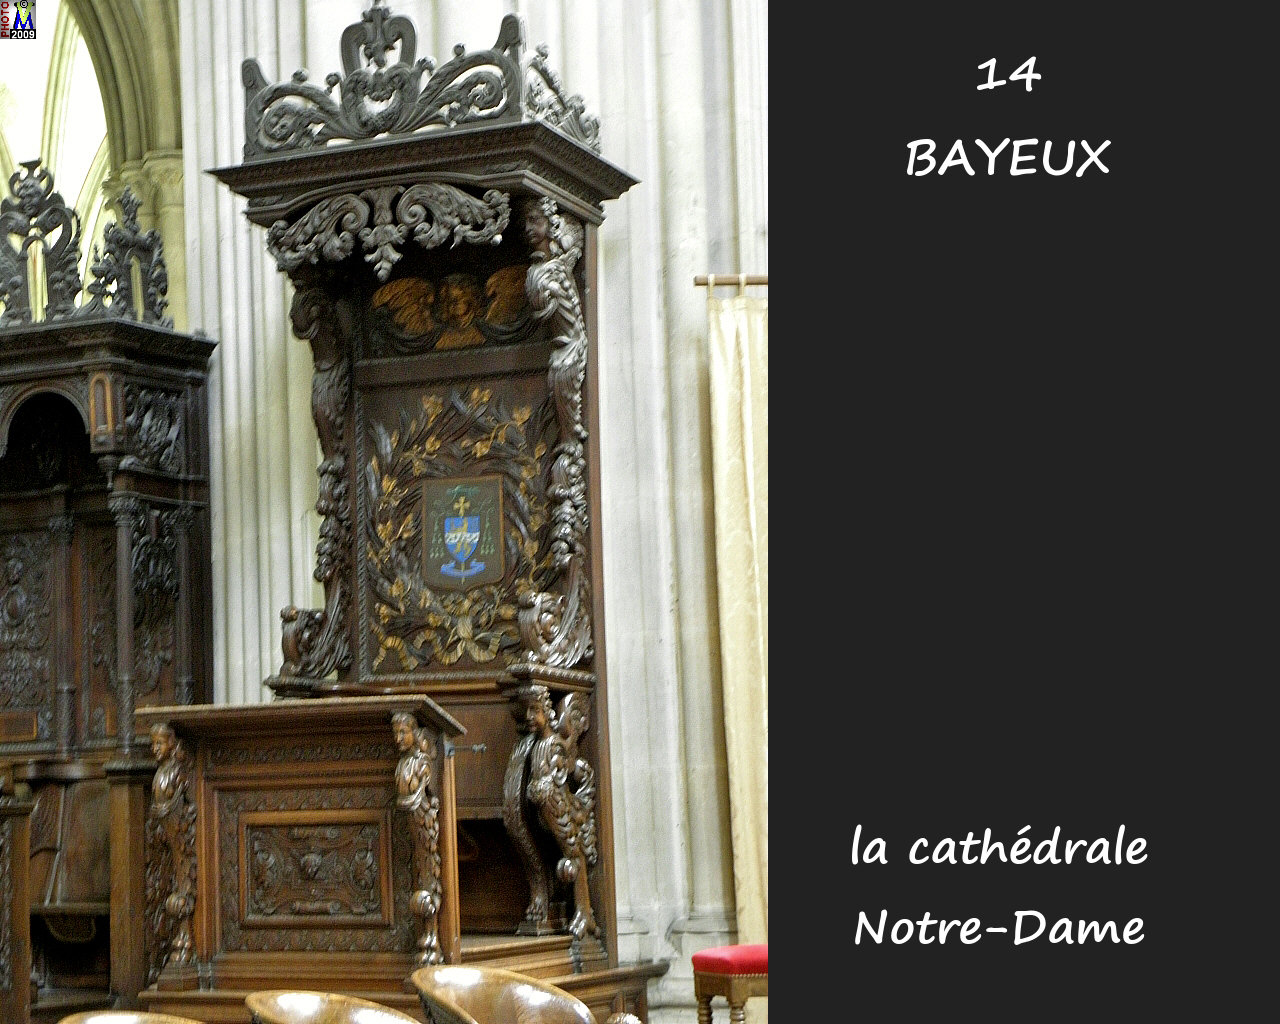 14BAYEUX_cathedrale_244.jpg